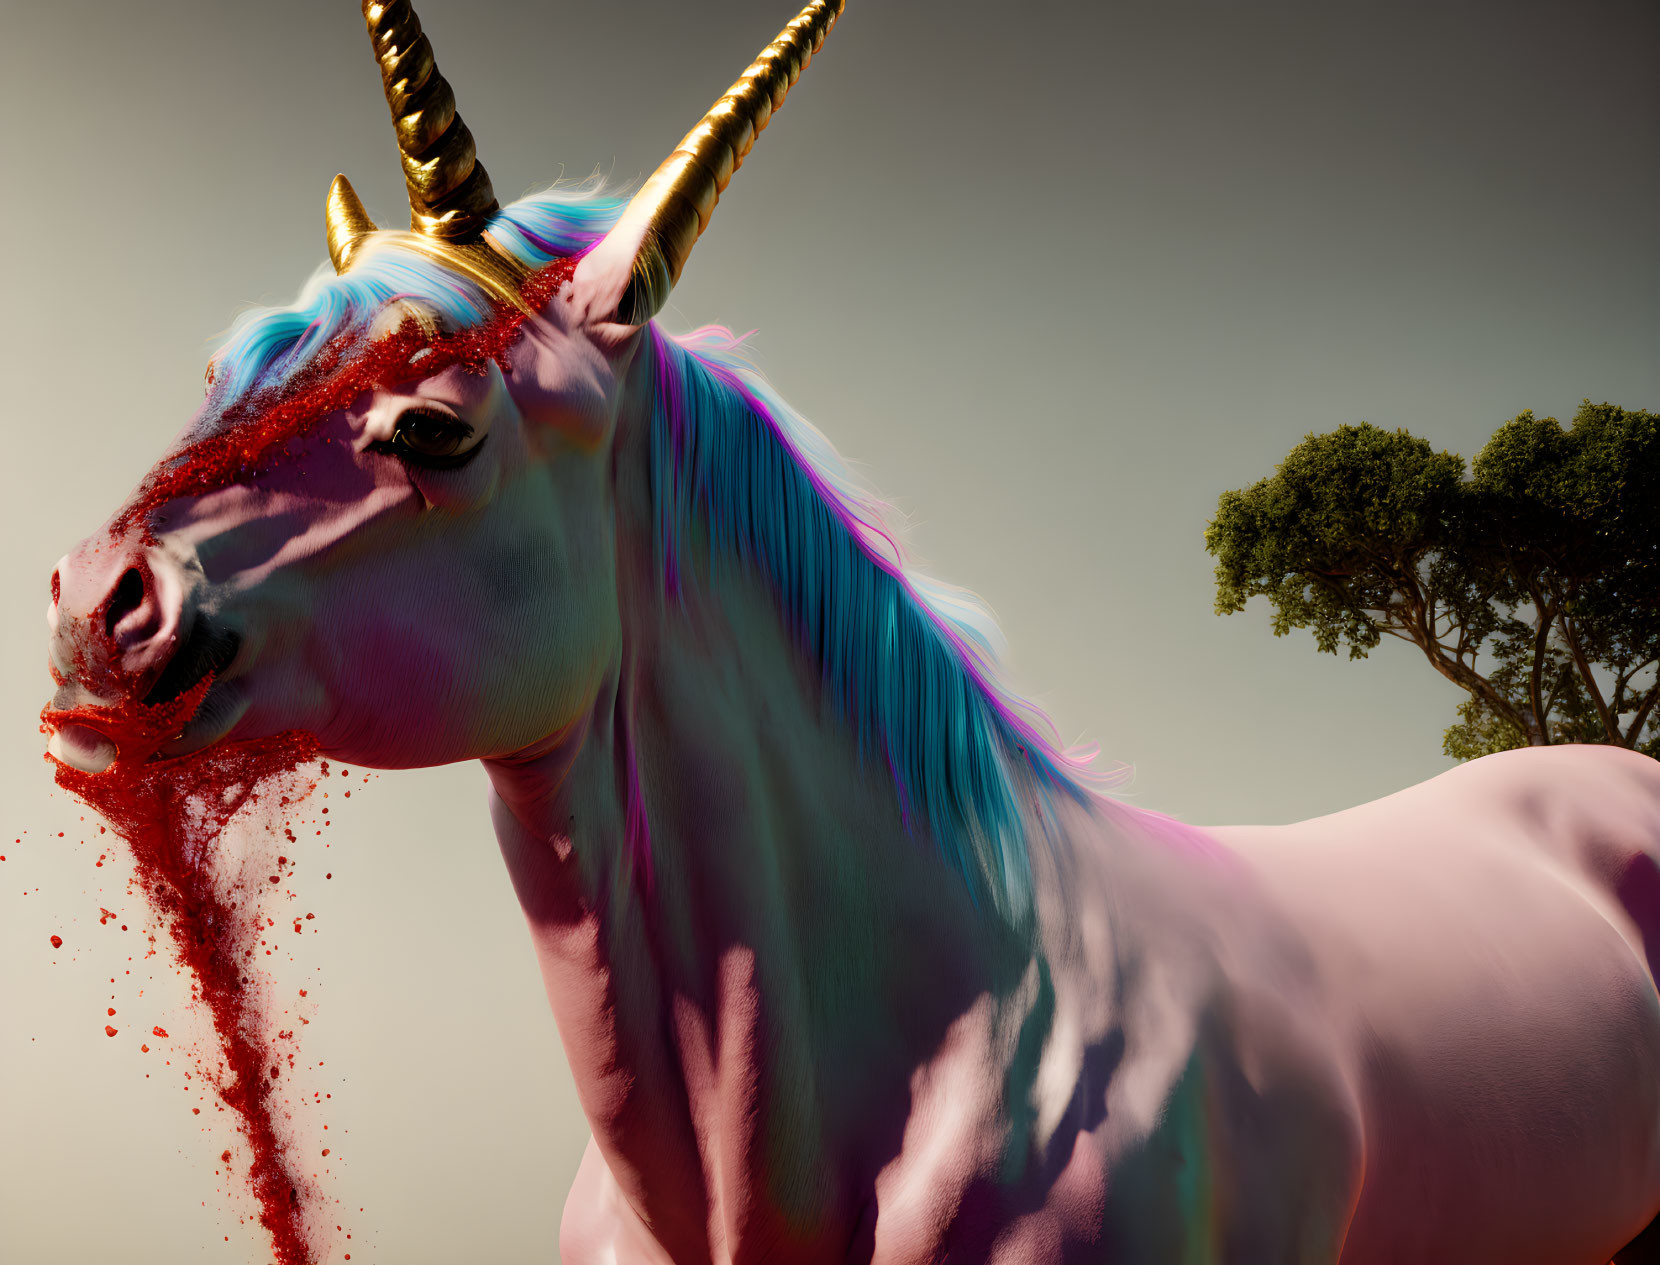 Multicolored maned unicorn digital art with bleeding mouth in nature setting